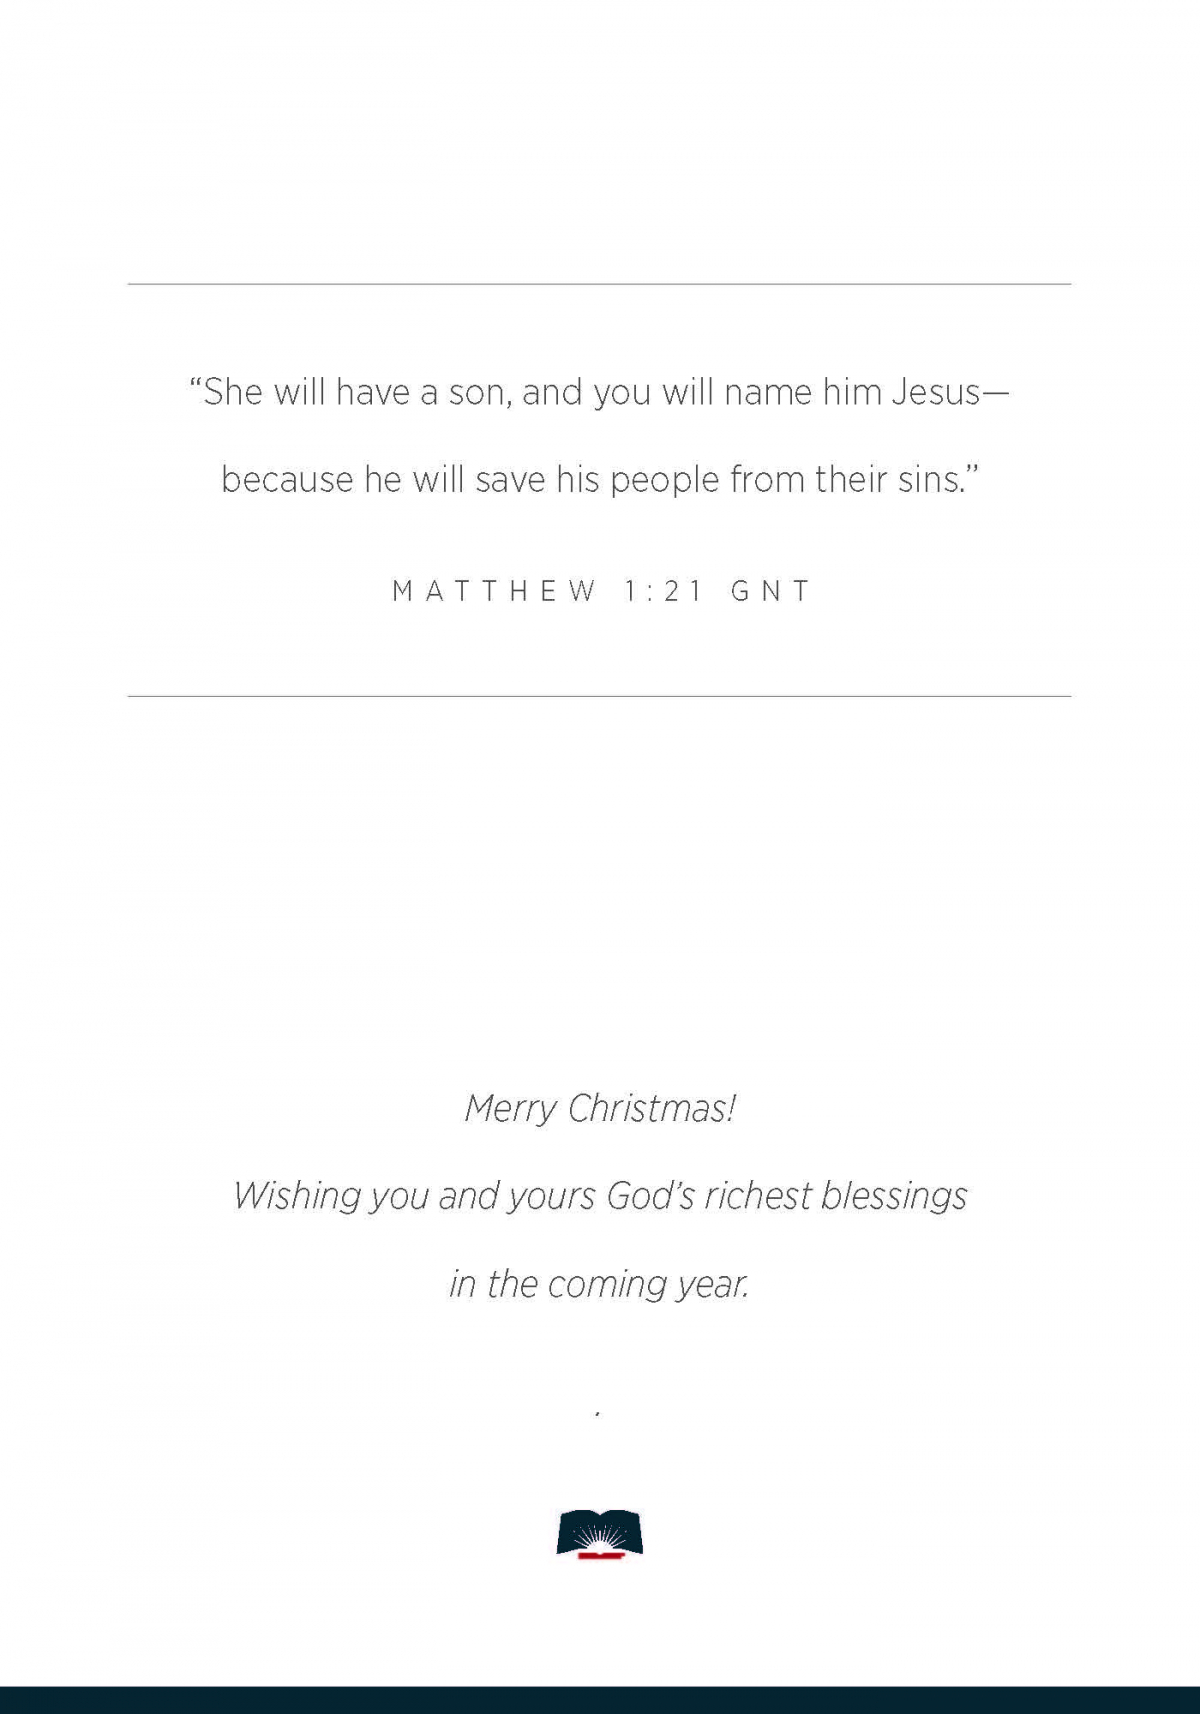 Merry Christmas from the Translation Team at American Bible Society_Страница_2.jpg